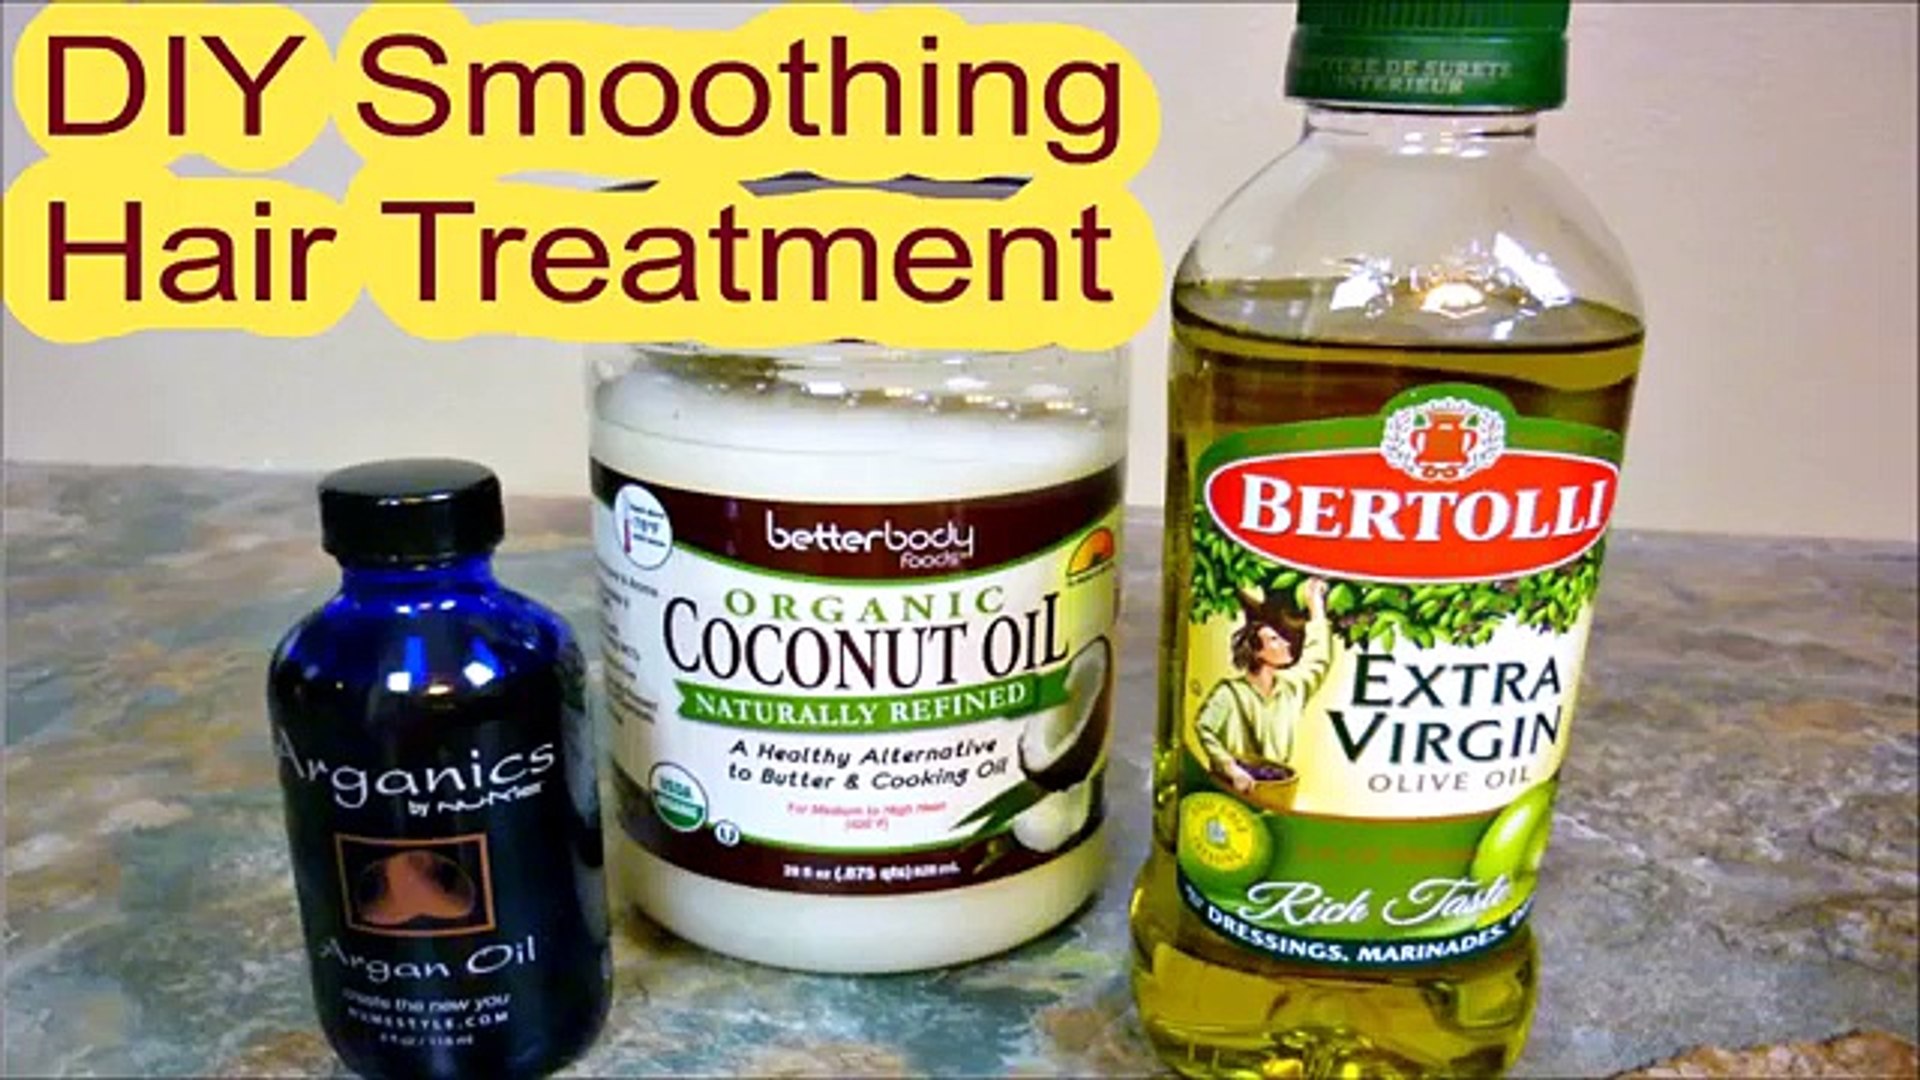 DIY Smoothing Hair Treatment, Coconut Oil Hair Mask Recipe At Home - video  Dailymotion